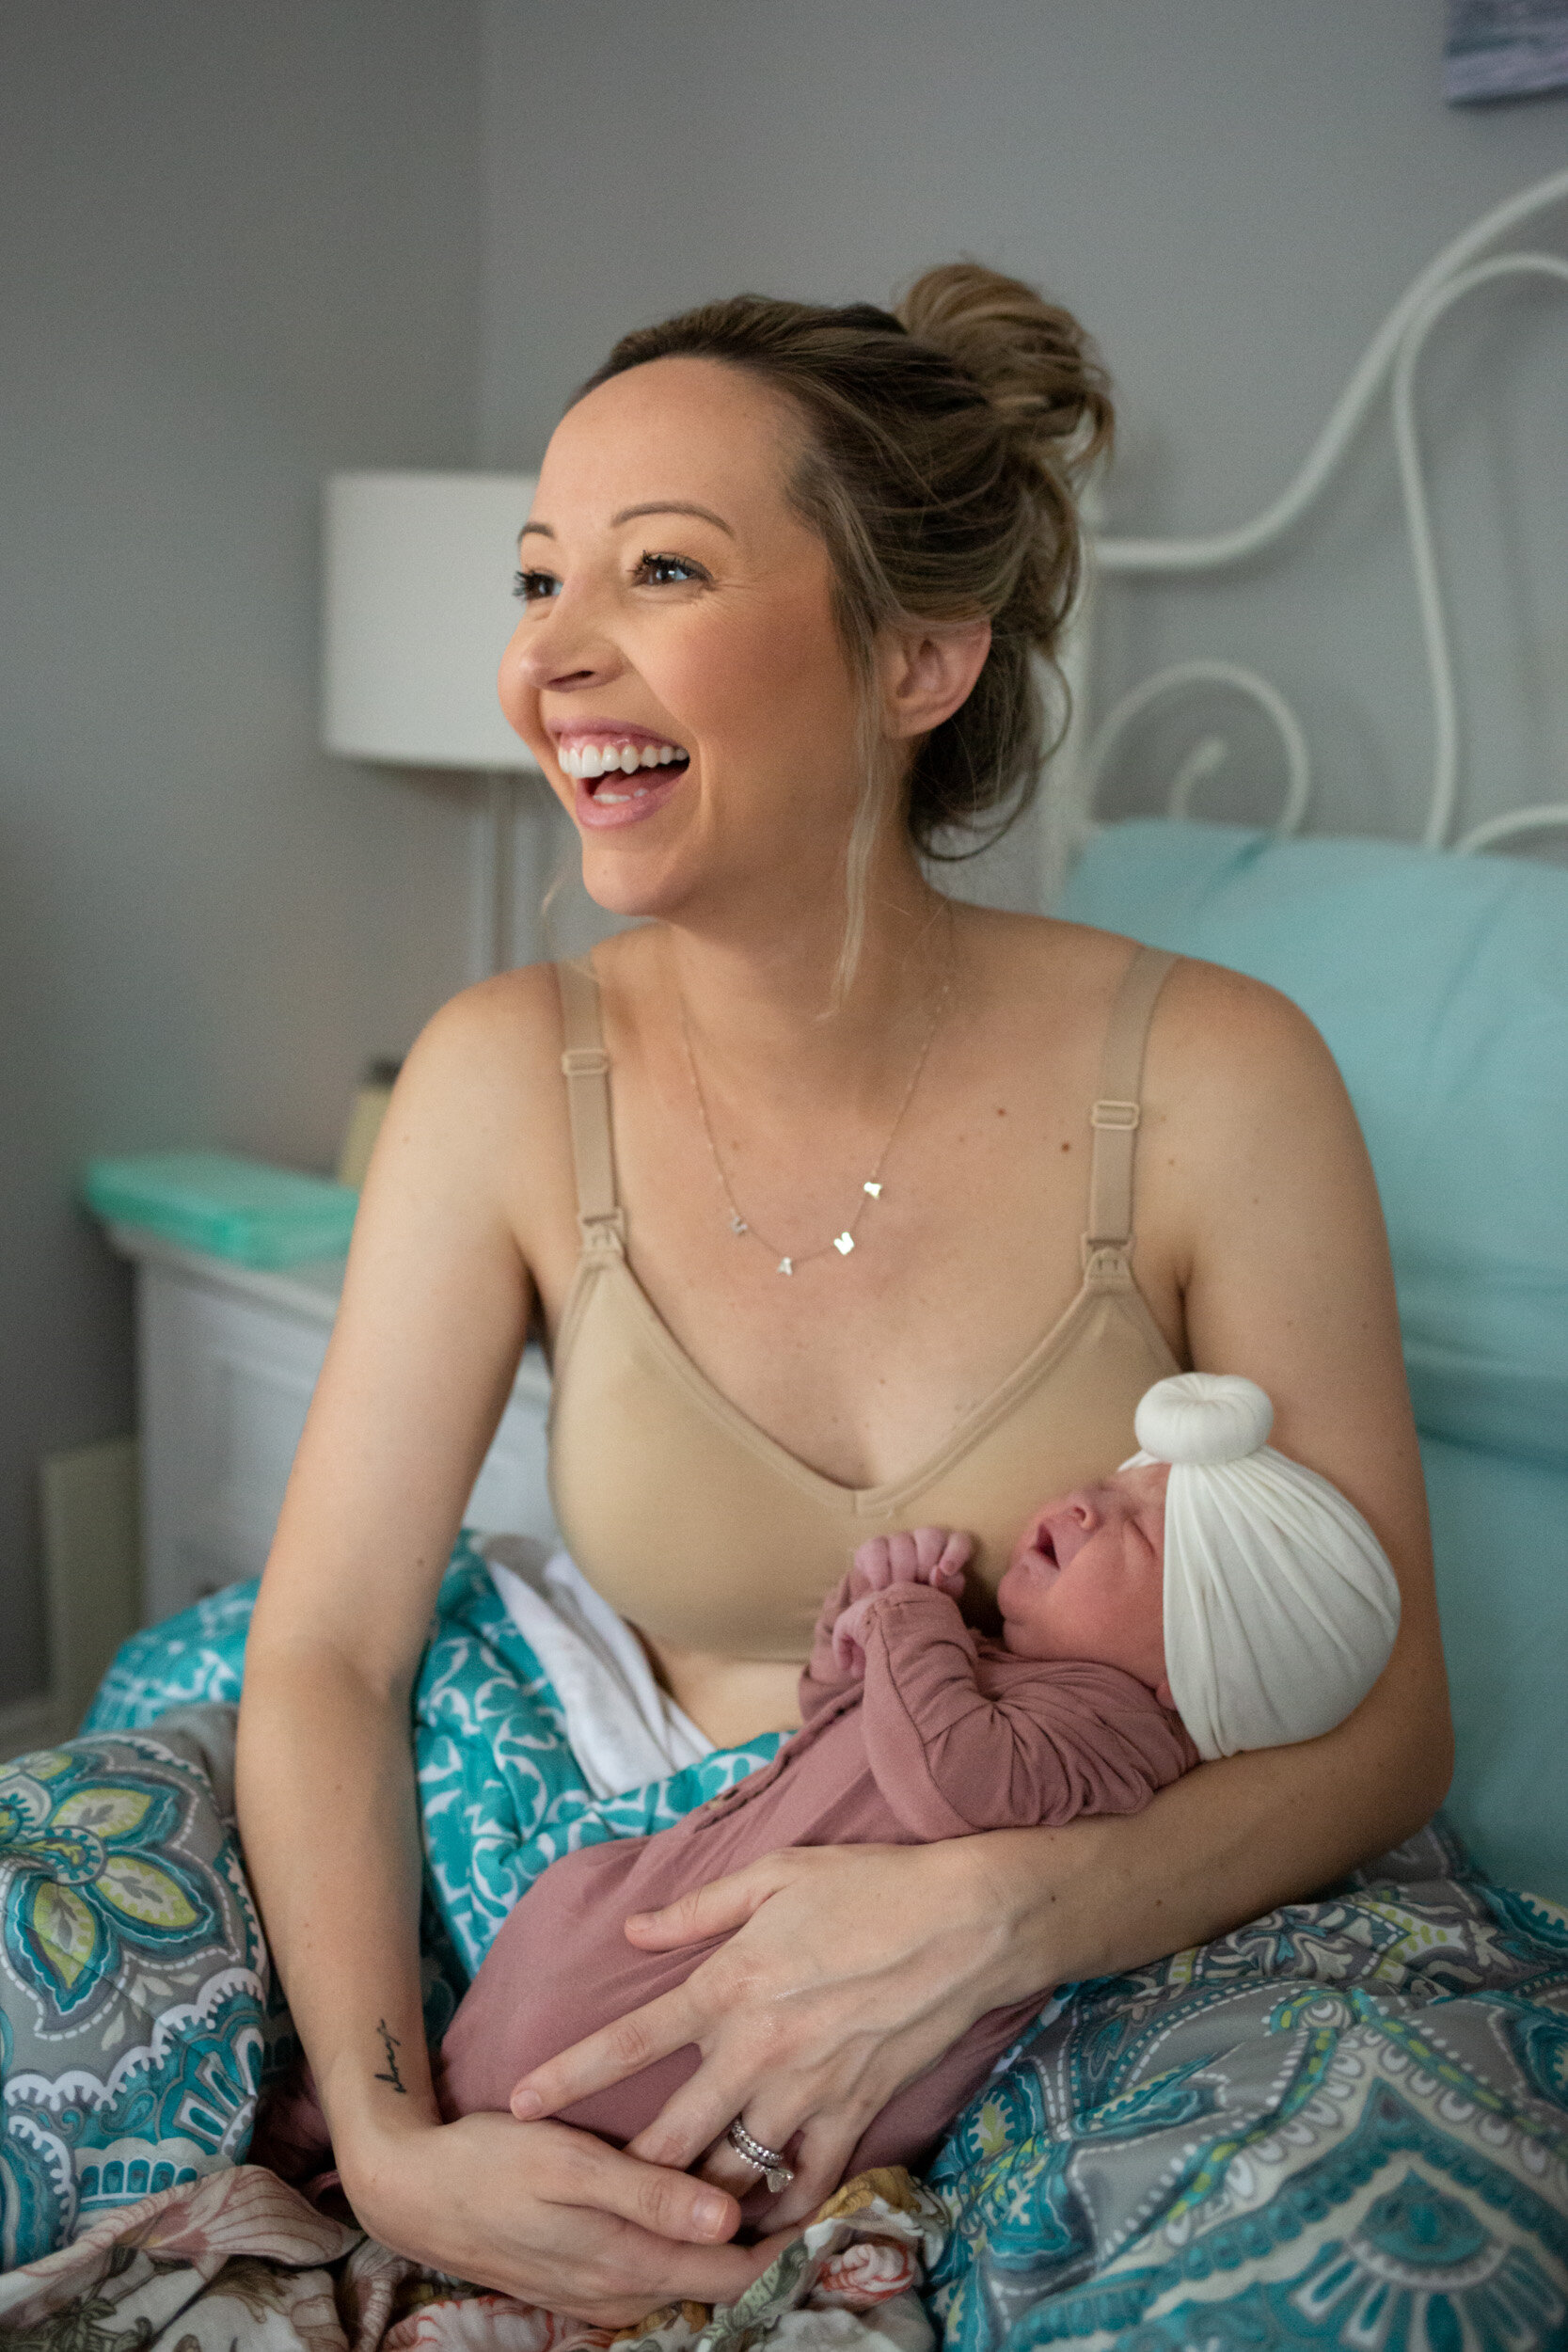 Jacksonville mom laughing while holding her baby just after birth